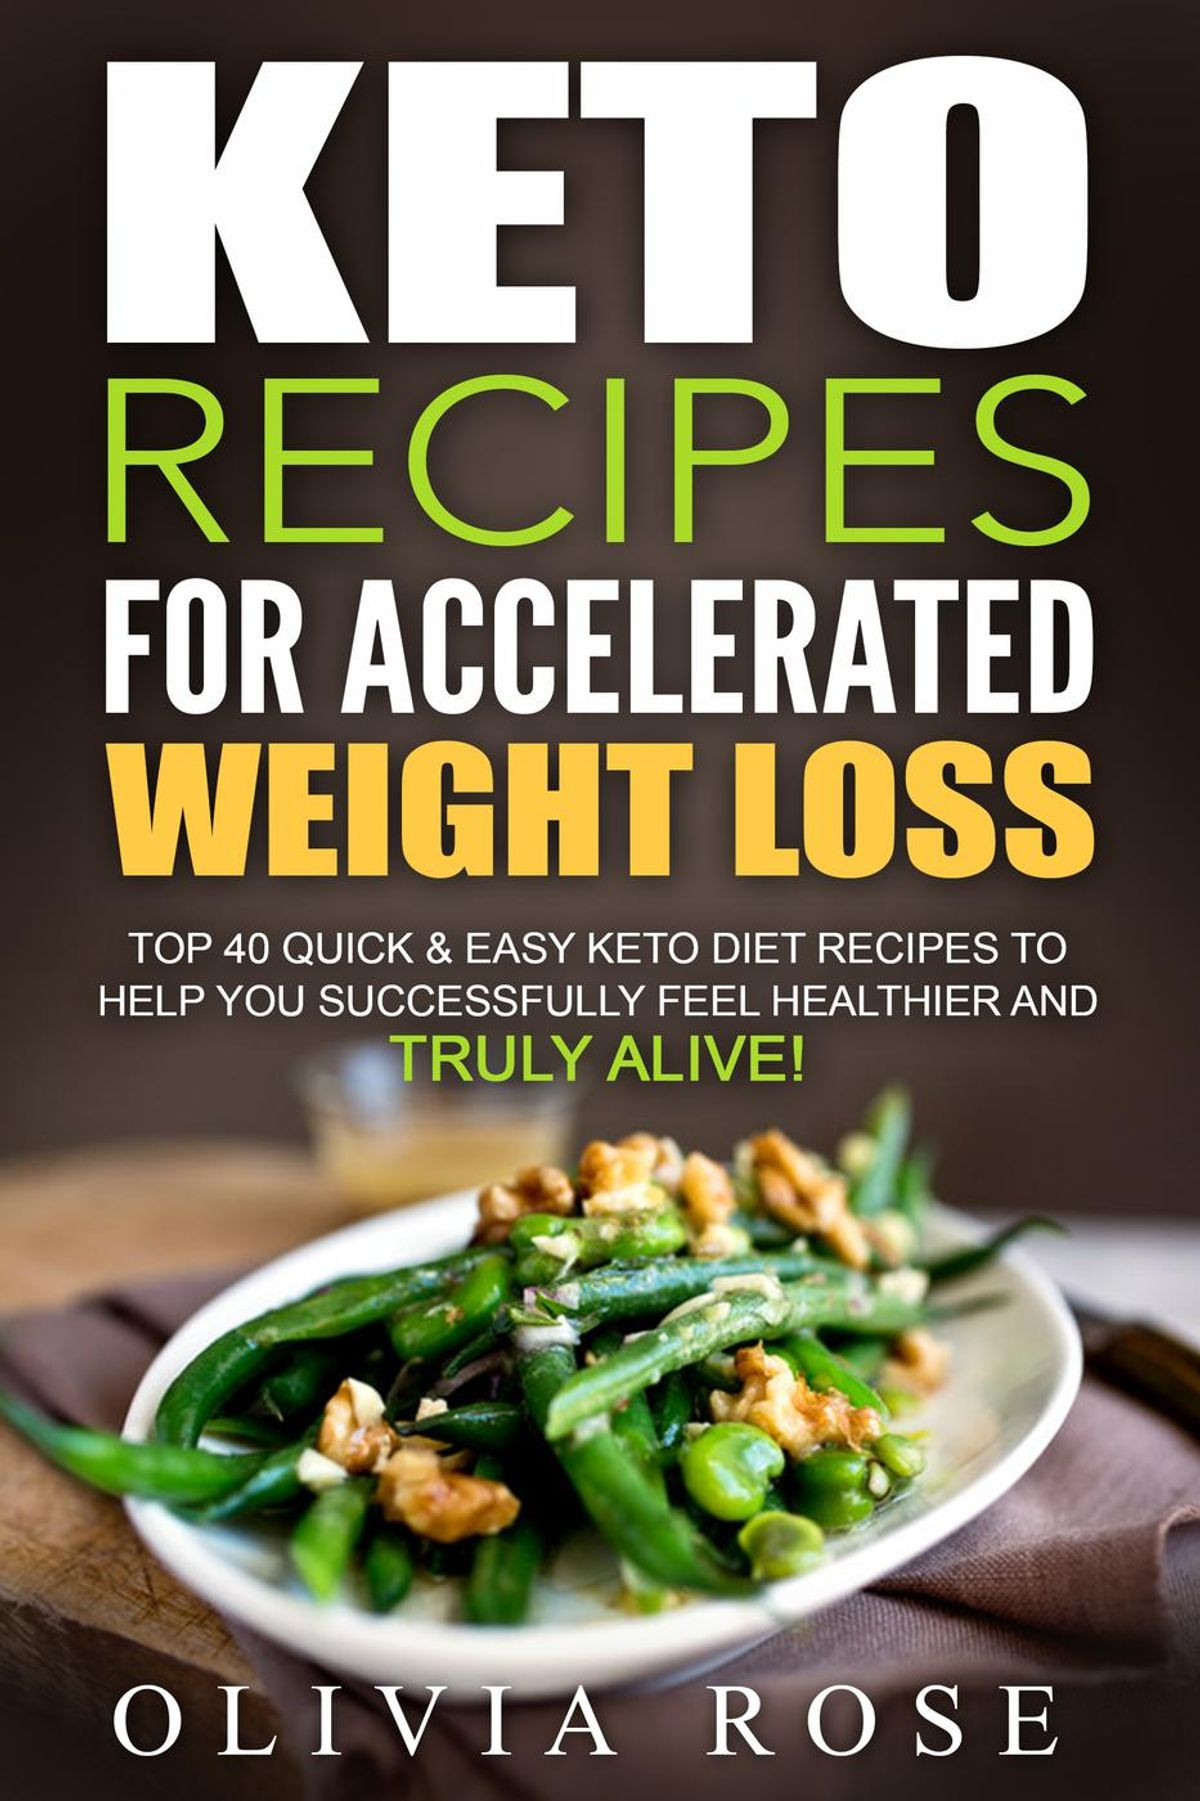 Best Keto Diet For Weight Loss
 Keto Recipes for Accelerated Weight Loss Top 40 Quick